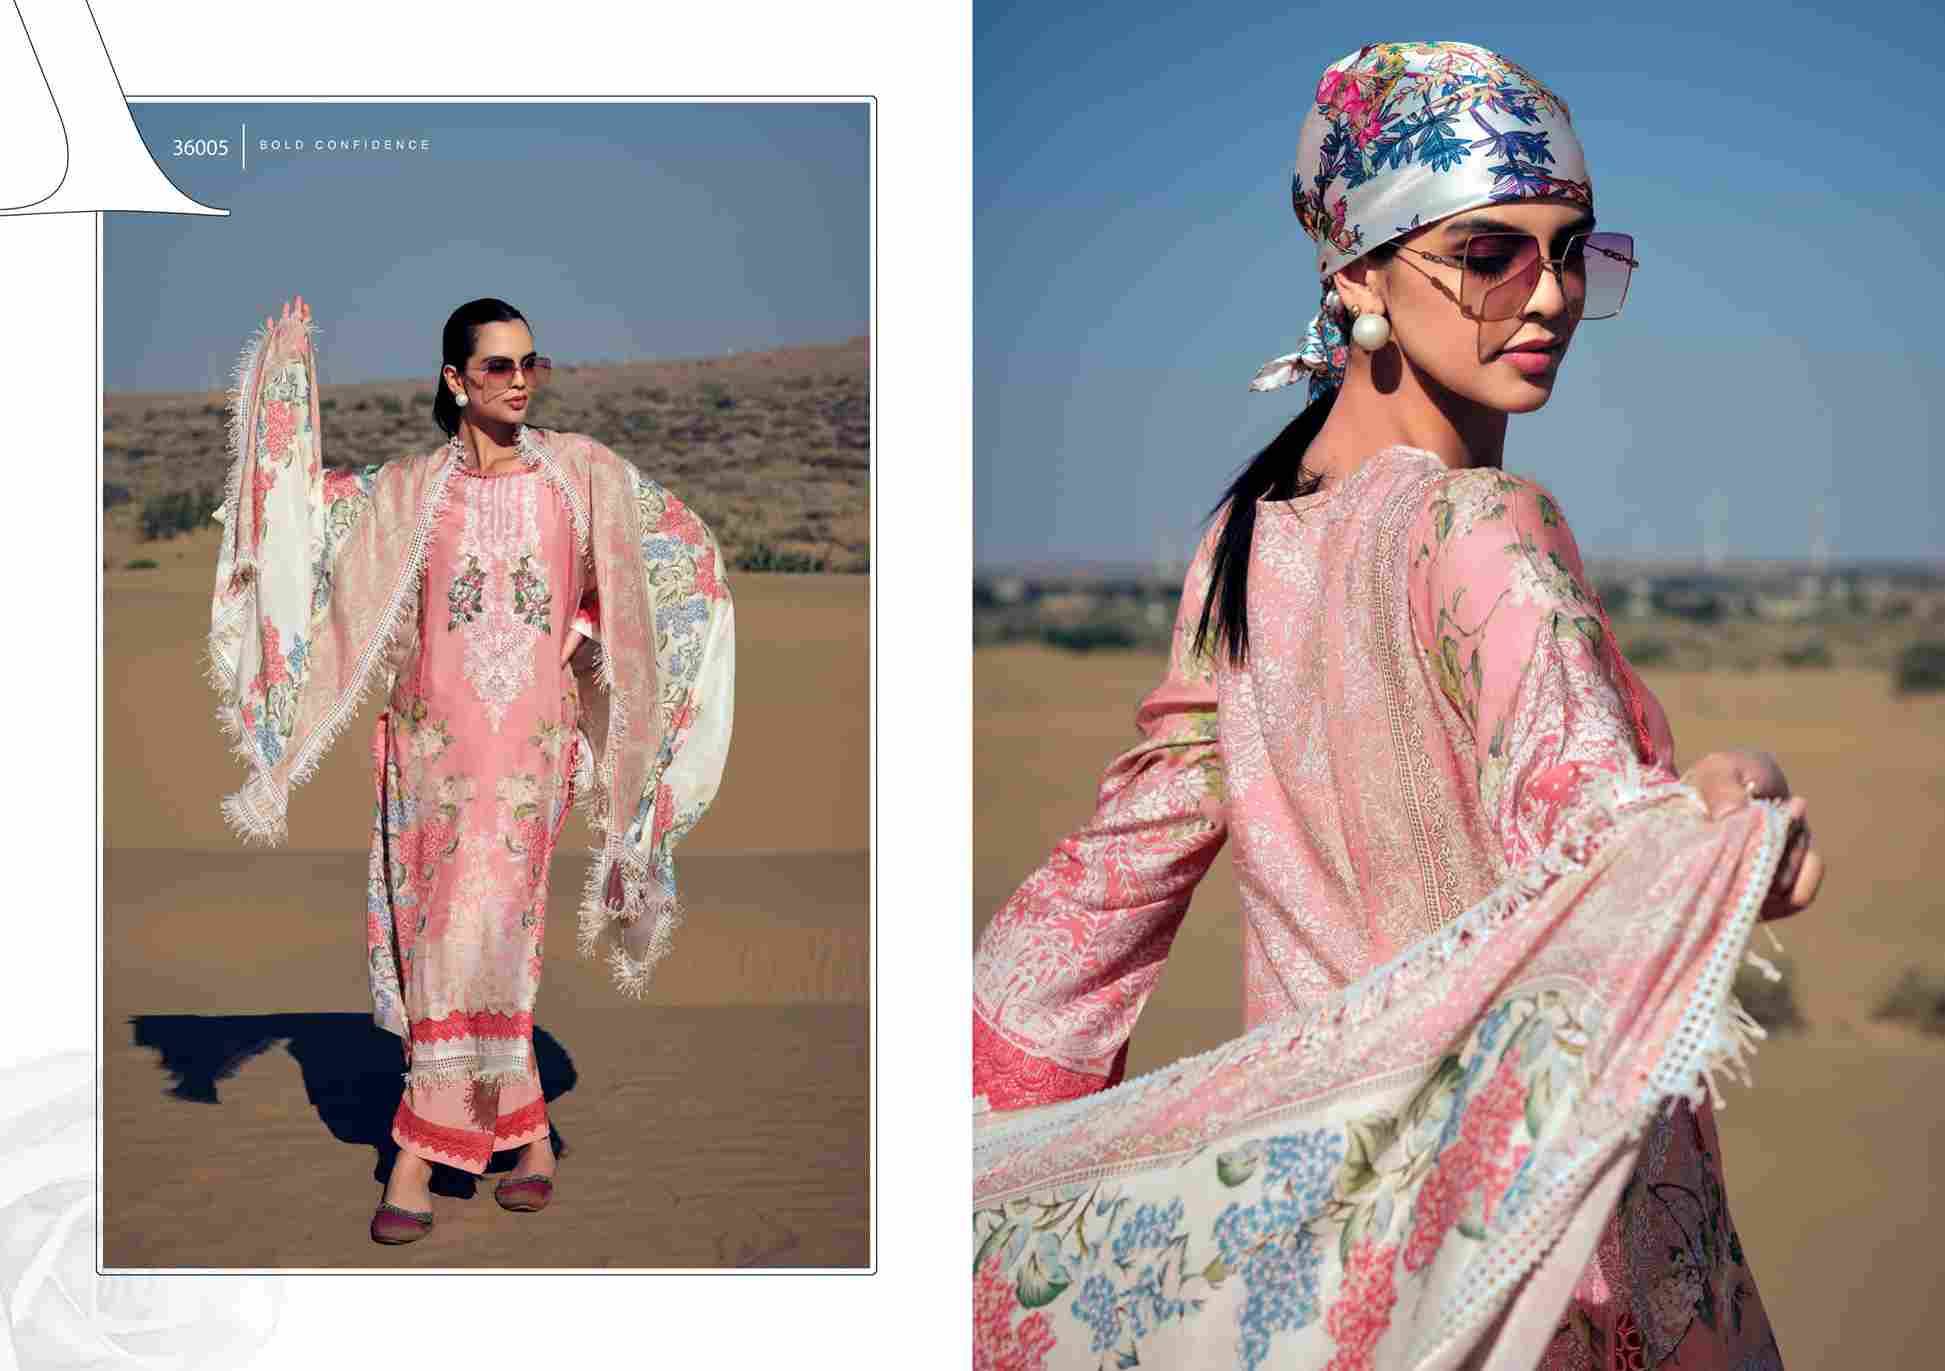 Petals By Gull Jee 36001 To 36006 Series Beautiful Festive Suits Colorful Stylish Fancy Casual Wear & Ethnic Wear Pure Muslin Embroidered Dresses At Wholesale Price